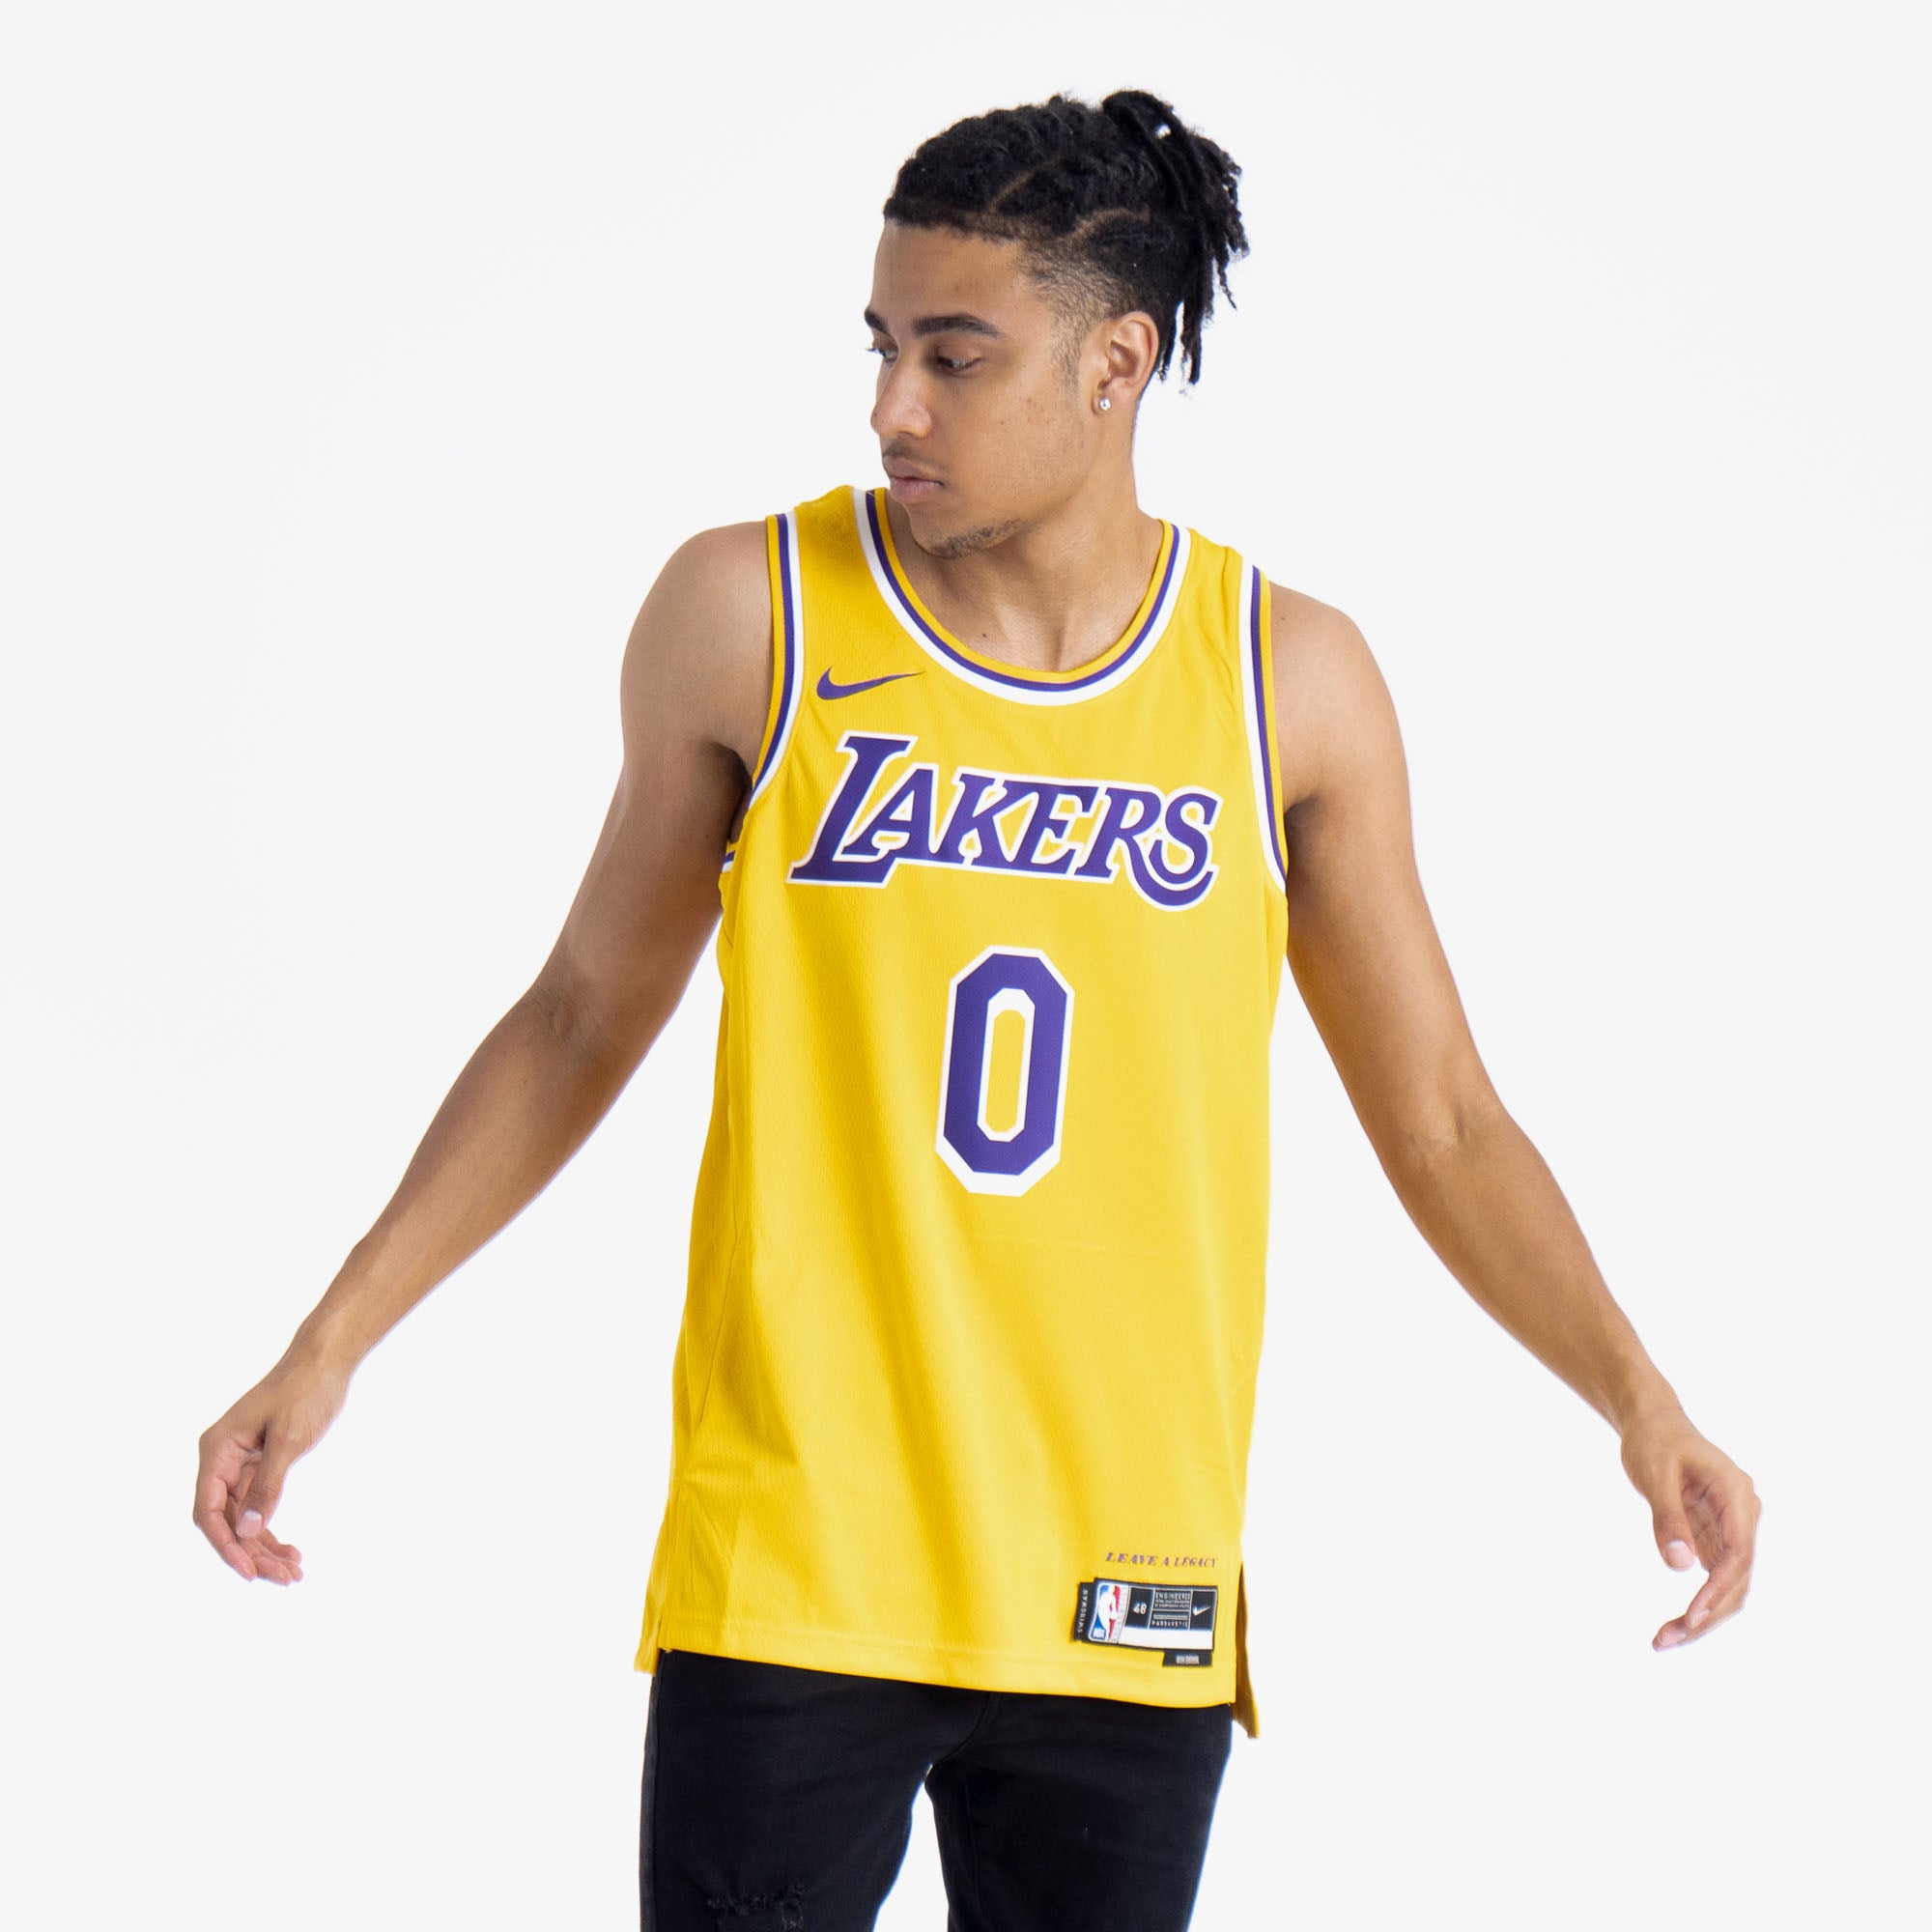 the west nba all star 2023 jersey｜TikTok Search